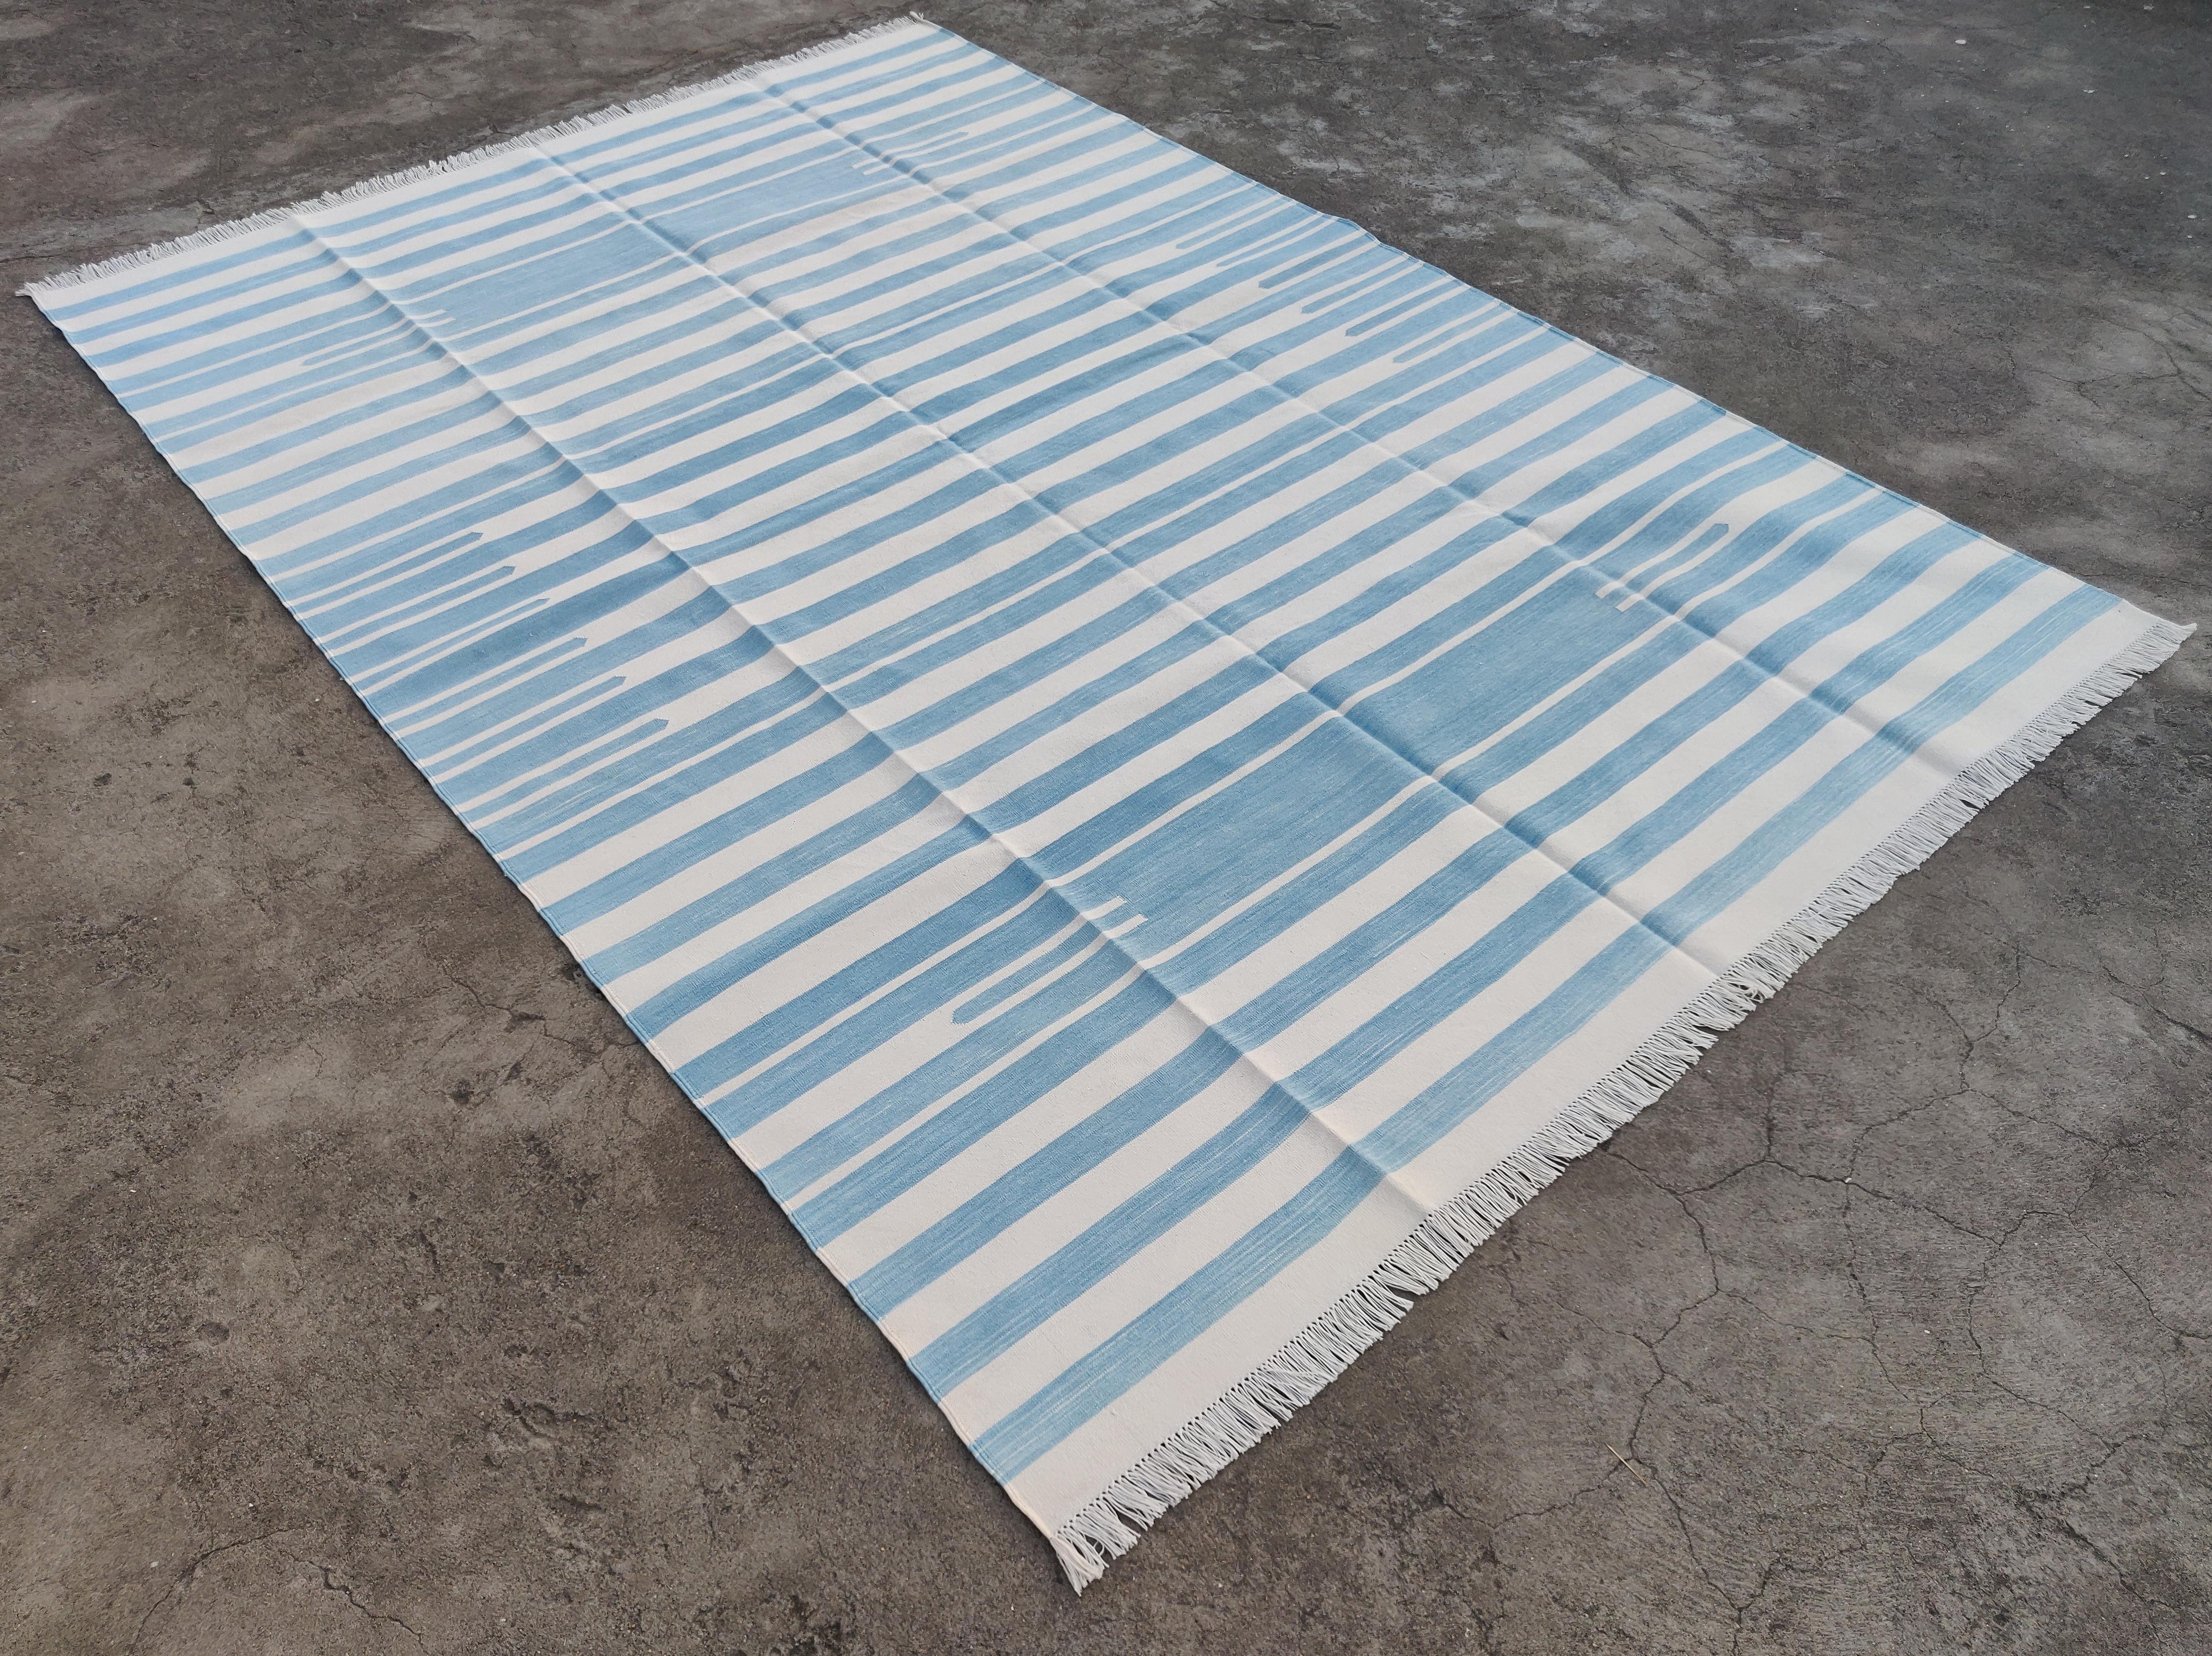 Cotton Vegetable Dyed Reversible Sky Blue And White Striped Indian Dhurrie Rug - 6'x9'
These special flat-weave dhurries are hand-woven with 15 ply 100% cotton yarn. Due to the special manufacturing techniques used to create our rugs, the size and